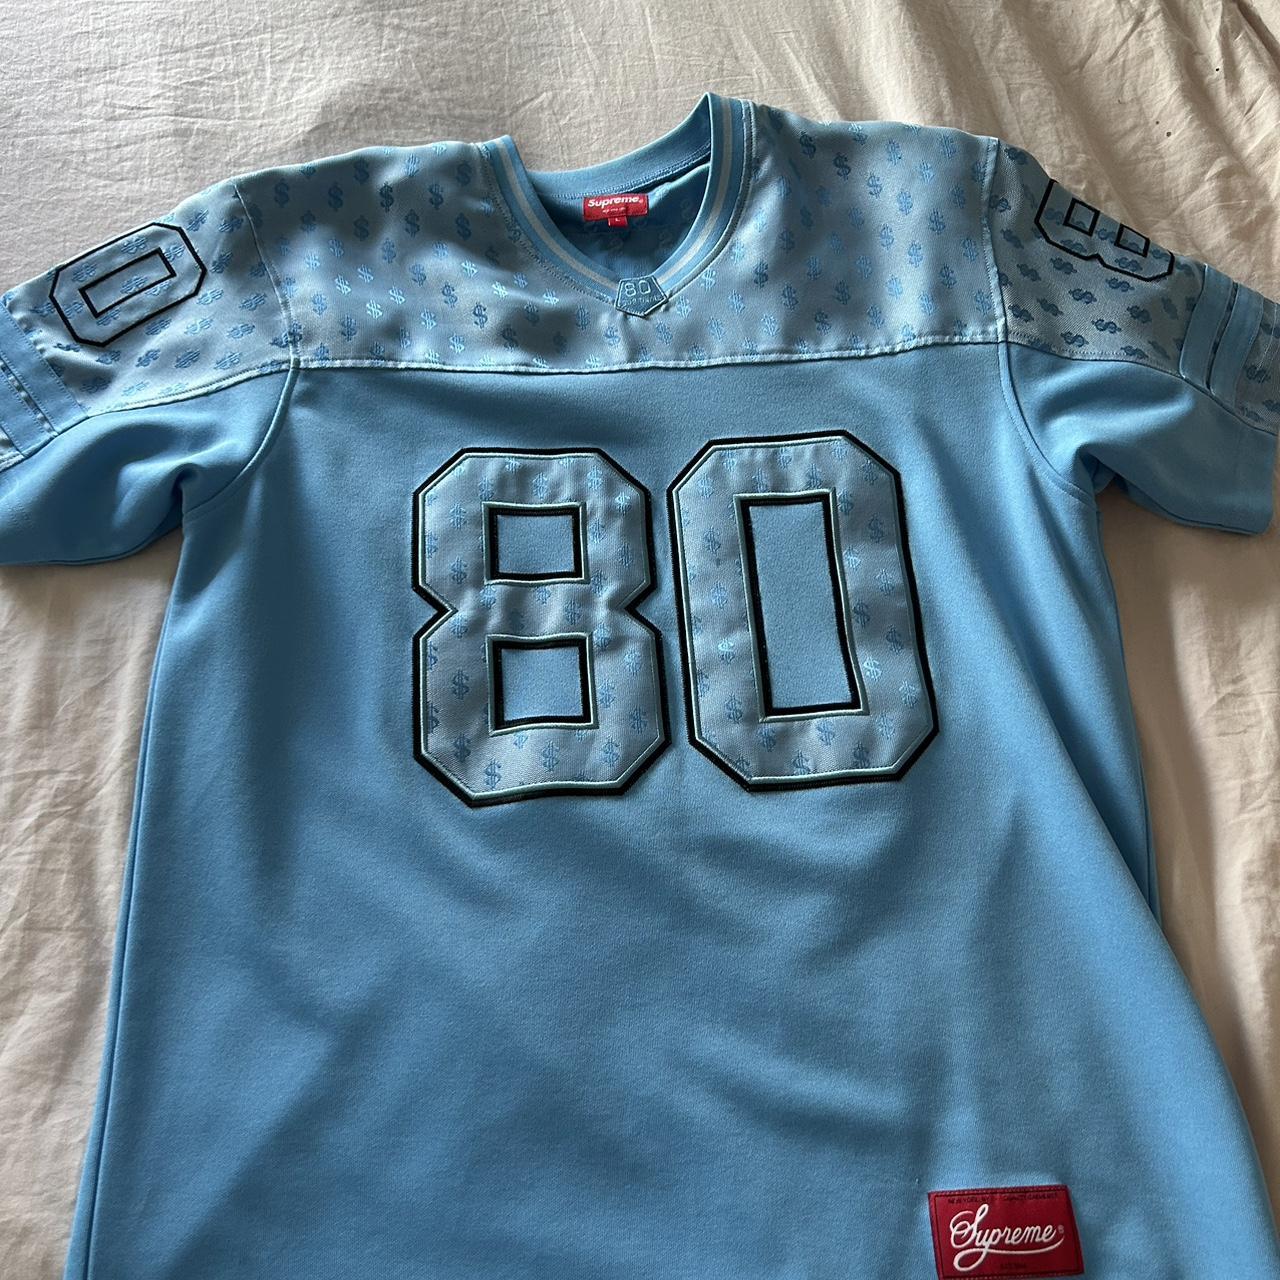 Supreme jersey with money sign detailing and...